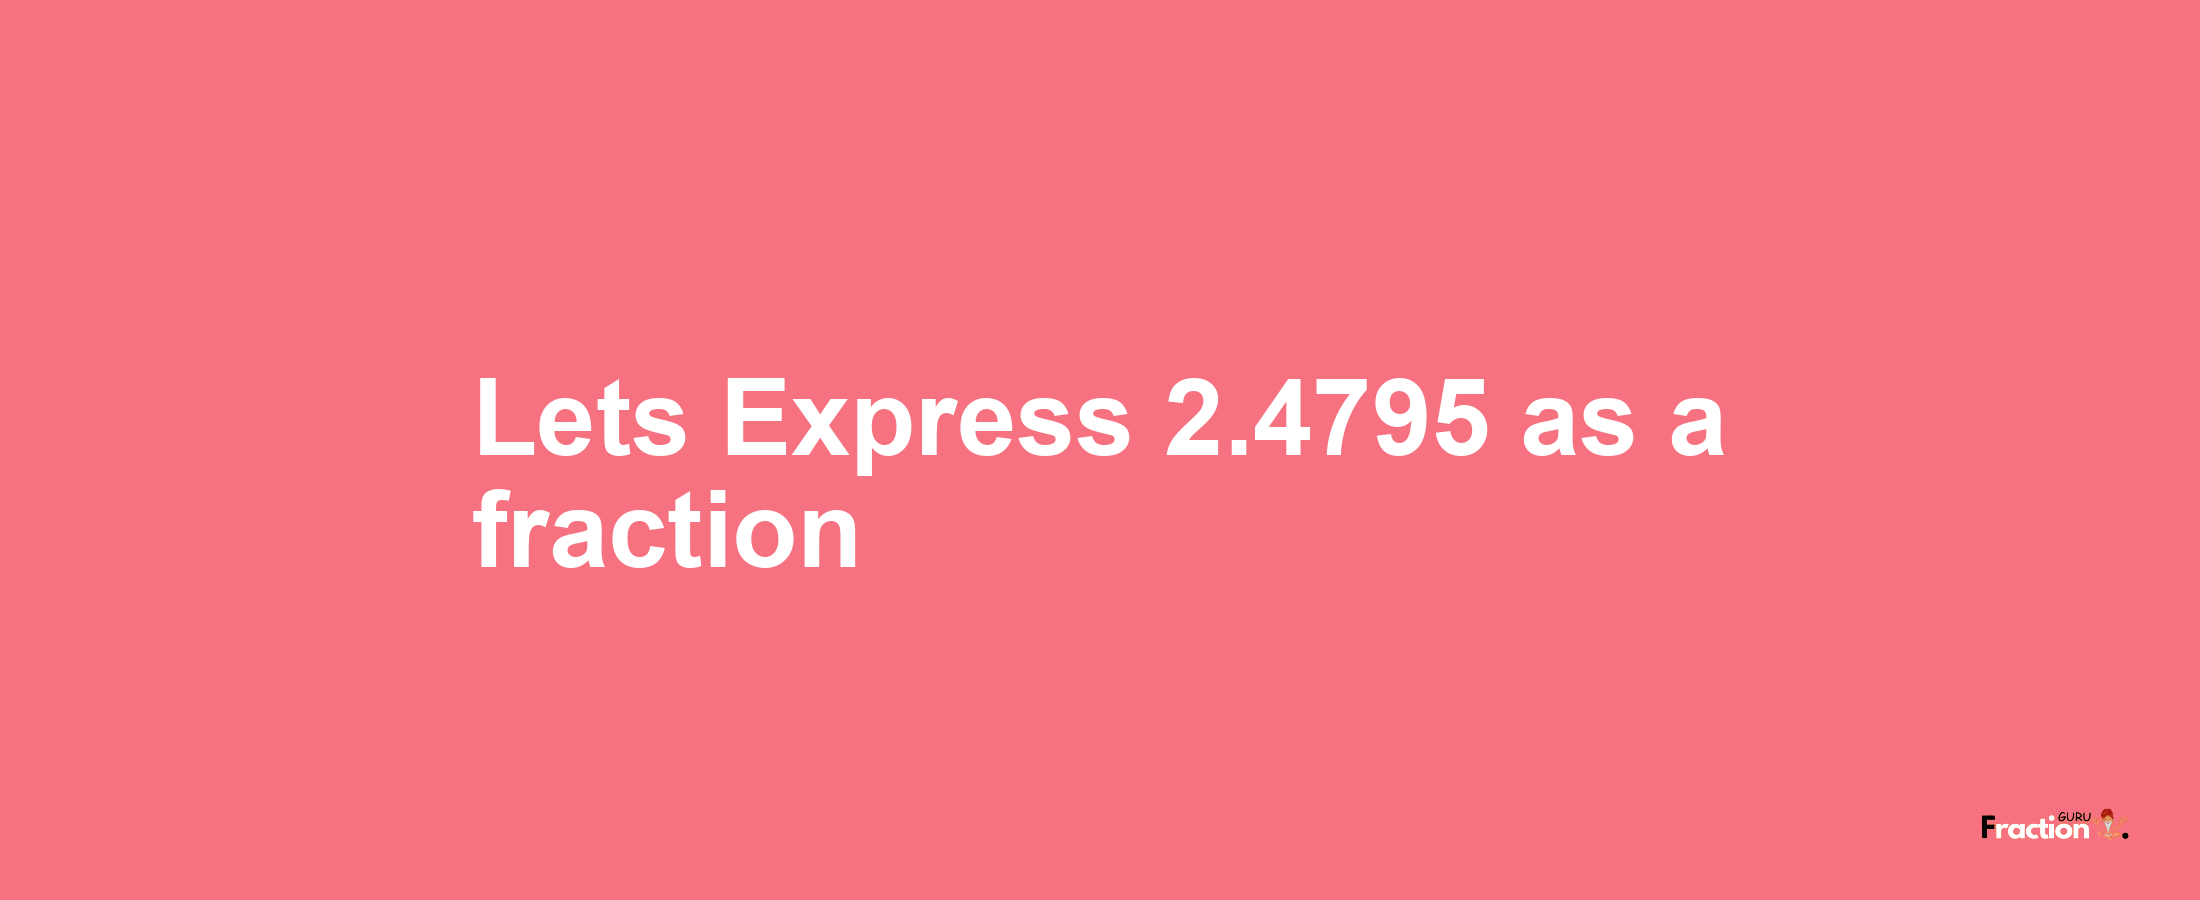 Lets Express 2.4795 as afraction